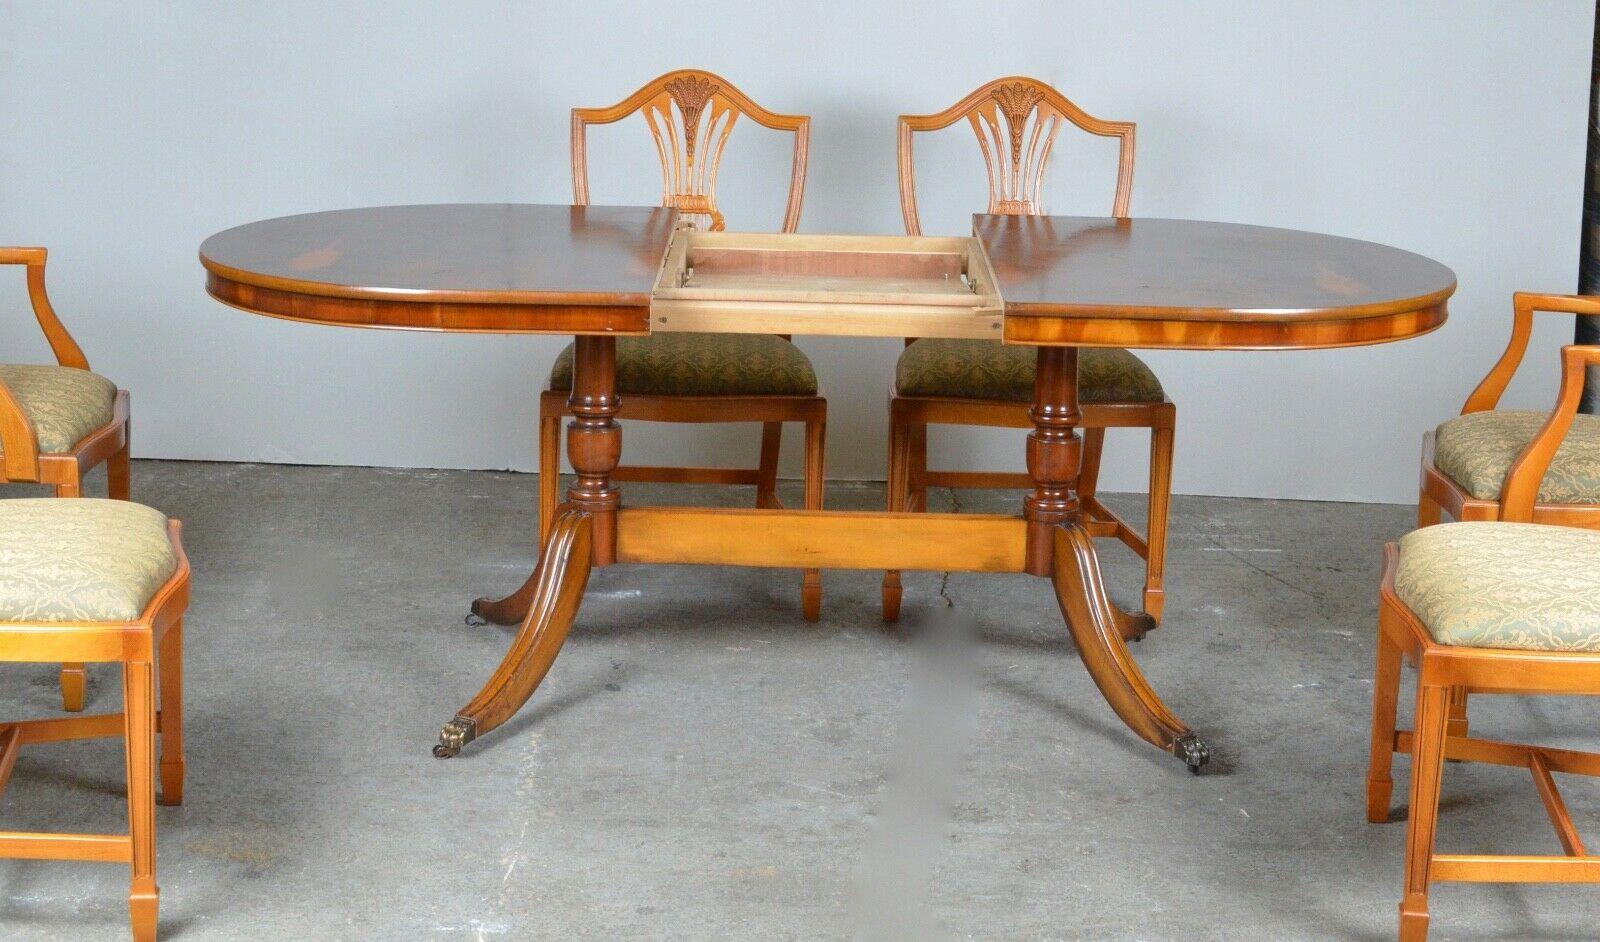 We are delighted to offer for sale this vintage burr Yew wood extending oval dining table with lion hairy paw castors and 6 chairs with spade feet. A good-looking and well-made table, this is a 20th century example, the legs are also yew wood with a